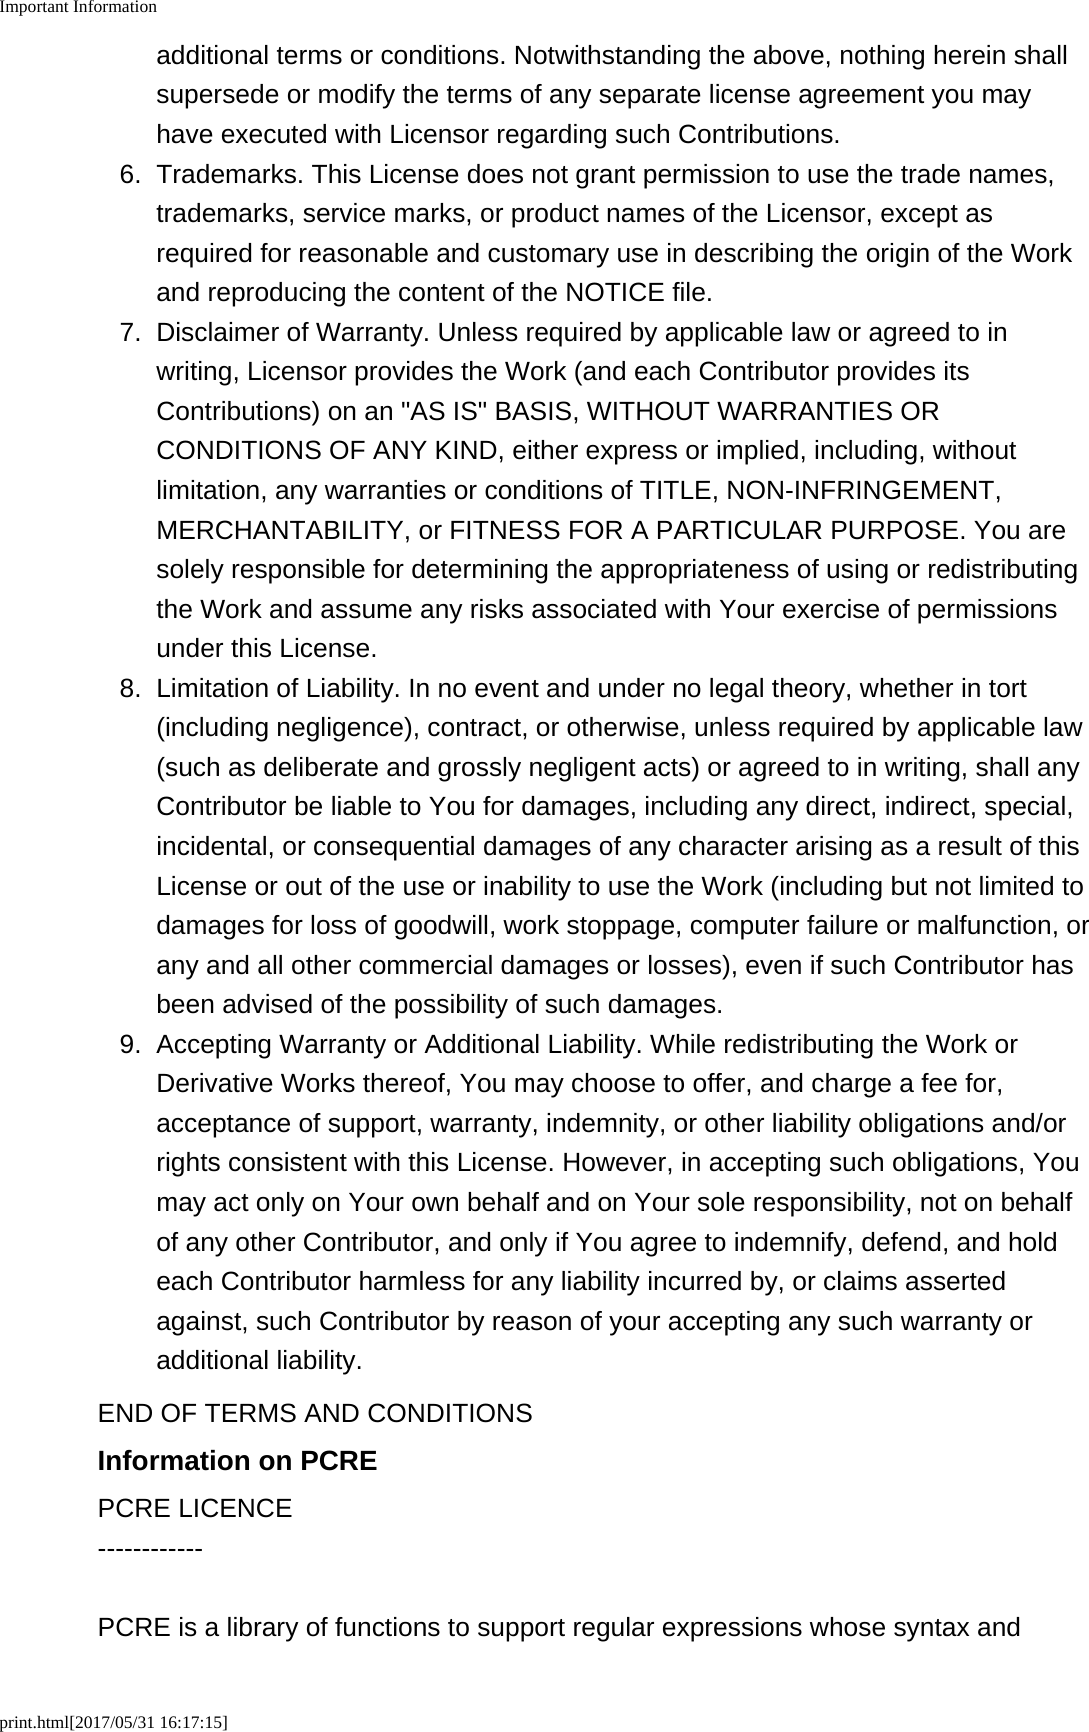 Important Informationprint.html[2017/05/31 16:17:15]additional terms or conditions. Notwithstanding the above, nothing herein shallsupersede or modify the terms of any separate license agreement you mayhave executed with Licensor regarding such Contributions.6. Trademarks. This License does not grant permission to use the trade names,trademarks, service marks, or product names of the Licensor, except asrequired for reasonable and customary use in describing the origin of the Workand reproducing the content of the NOTICE file.7. Disclaimer of Warranty. Unless required by applicable law or agreed to inwriting, Licensor provides the Work (and each Contributor provides itsContributions) on an &quot;AS IS&quot; BASIS, WITHOUT WARRANTIES ORCONDITIONS OF ANY KIND, either express or implied, including, withoutlimitation, any warranties or conditions of TITLE, NON-INFRINGEMENT,MERCHANTABILITY, or FITNESS FOR A PARTICULAR PURPOSE. You aresolely responsible for determining the appropriateness of using or redistributingthe Work and assume any risks associated with Your exercise of permissionsunder this License.8.Limitation of Liability. In no event and under no legal theory, whether in tort(including negligence), contract, or otherwise, unless required by applicable law(such as deliberate and grossly negligent acts) or agreed to in writing, shall anyContributor be liable to You for damages, including any direct, indirect, special,incidental, or consequential damages of any character arising as a result of thisLicense or out of the use or inability to use the Work (including but not limited todamages for loss of goodwill, work stoppage, computer failure or malfunction, orany and all other commercial damages or losses), even if such Contributor hasbeen advised of the possibility of such damages.9. Accepting Warranty or Additional Liability. While redistributing the Work orDerivative Works thereof, You may choose to offer, and charge a fee for,acceptance of support, warranty, indemnity, or other liability obligations and/orrights consistent with this License. However, in accepting such obligations, Youmay act only on Your own behalf and on Your sole responsibility, not on behalfof any other Contributor, and only if You agree to indemnify, defend, and holdeach Contributor harmless for any liability incurred by, or claims assertedagainst, such Contributor by reason of your accepting any such warranty oradditional liability.END OF TERMS AND CONDITIONSInformation on PCREPCRE LICENCE------------PCRE is a library of functions to support regular expressions whose syntax and